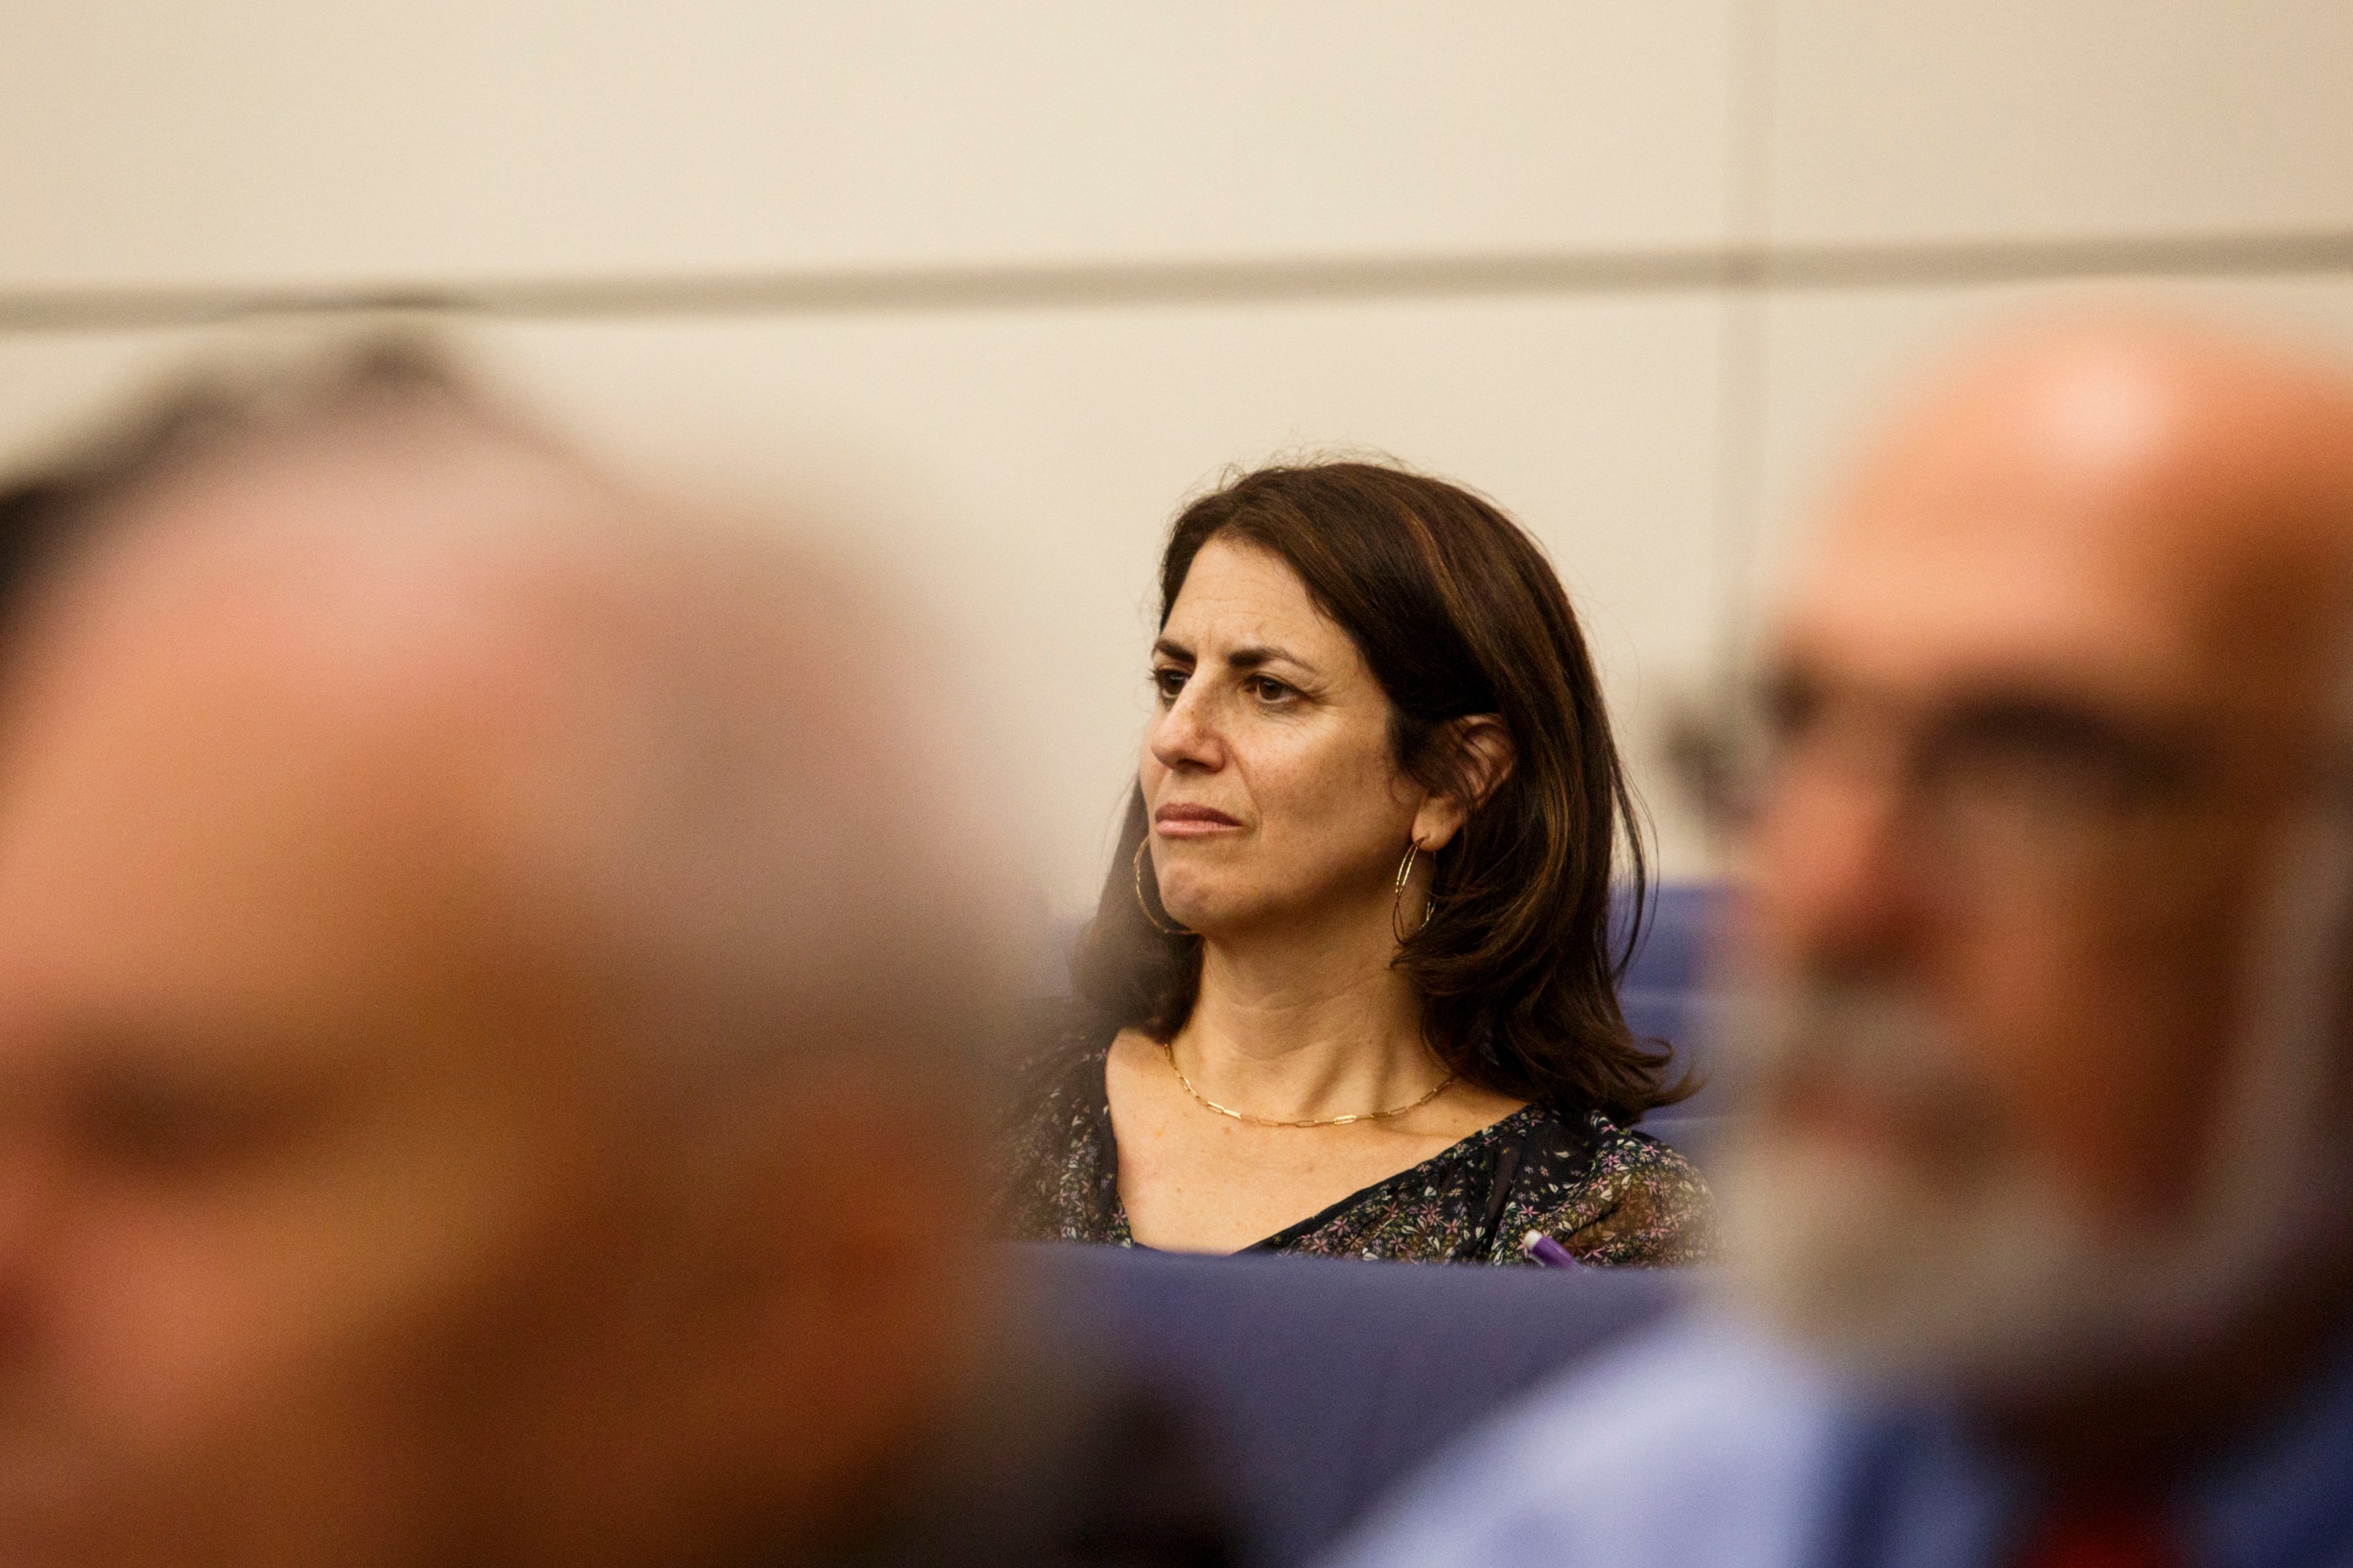 A woman stairs into the distance at a hearing.